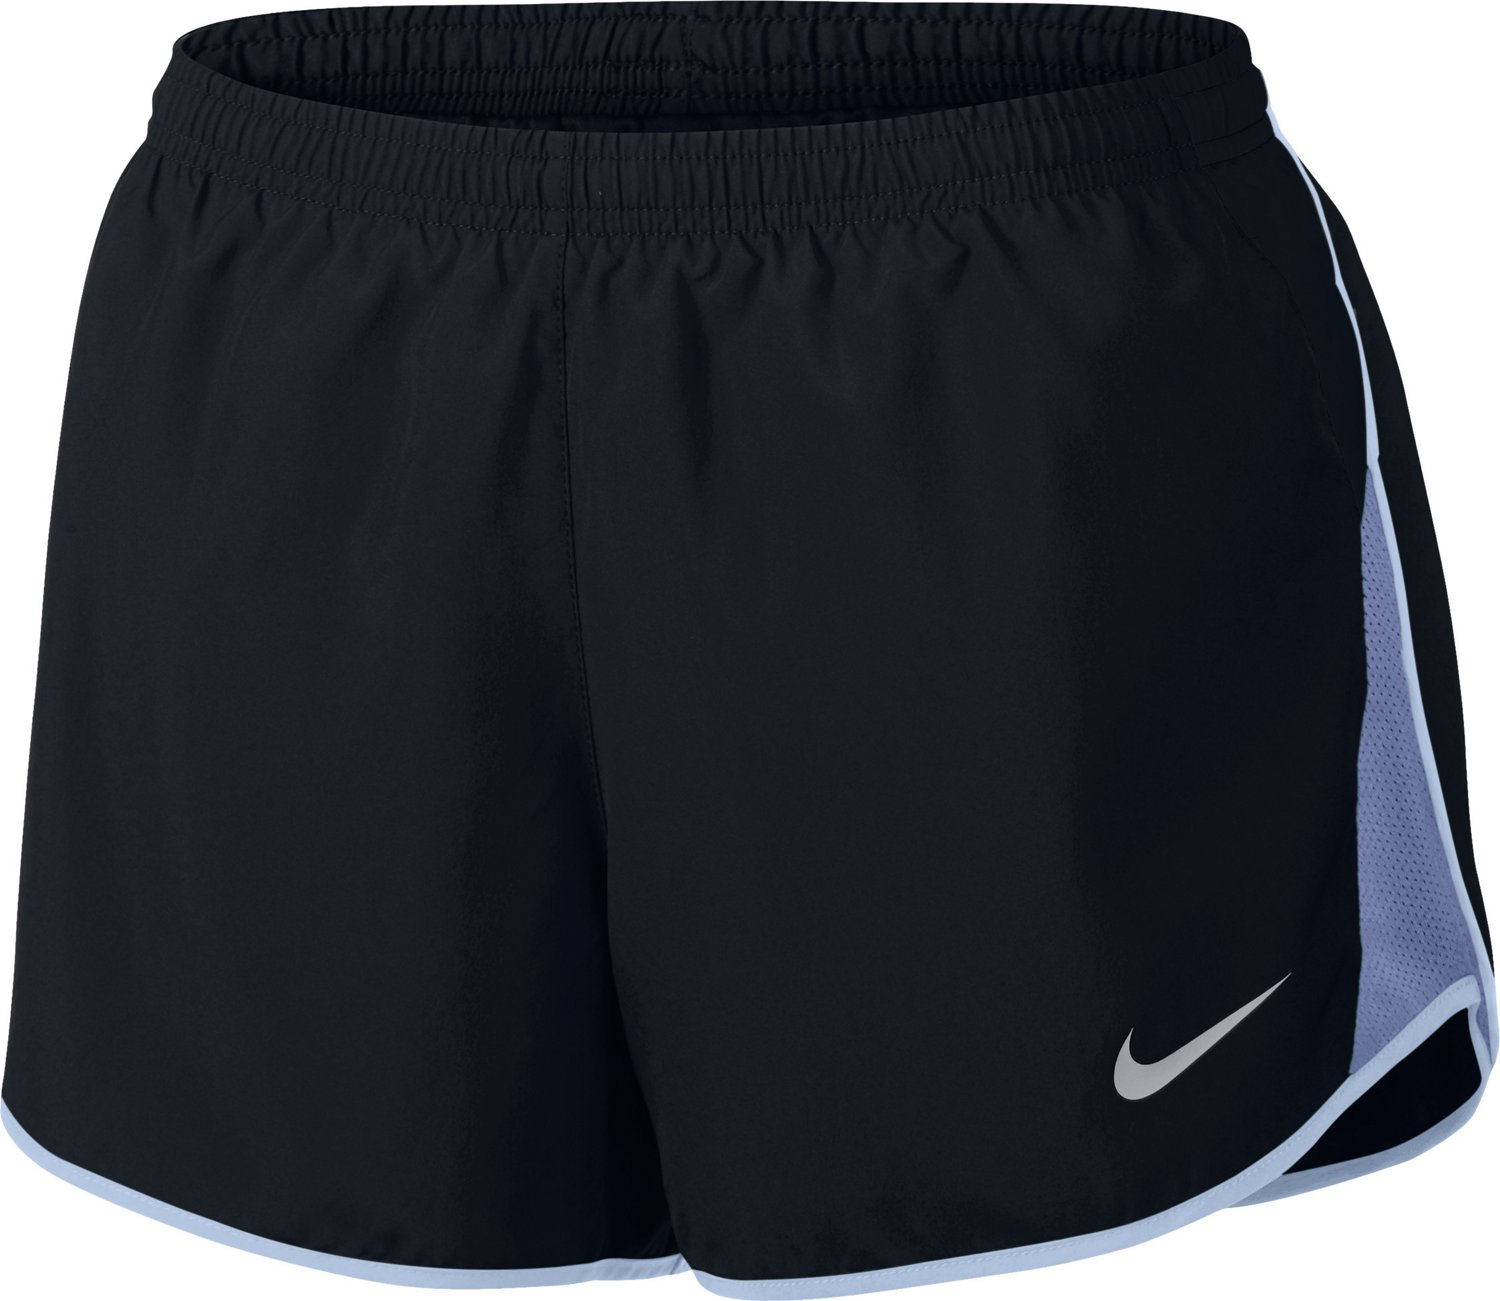 Nike Women's Dry Running Shorts | Free Shipping at Academy